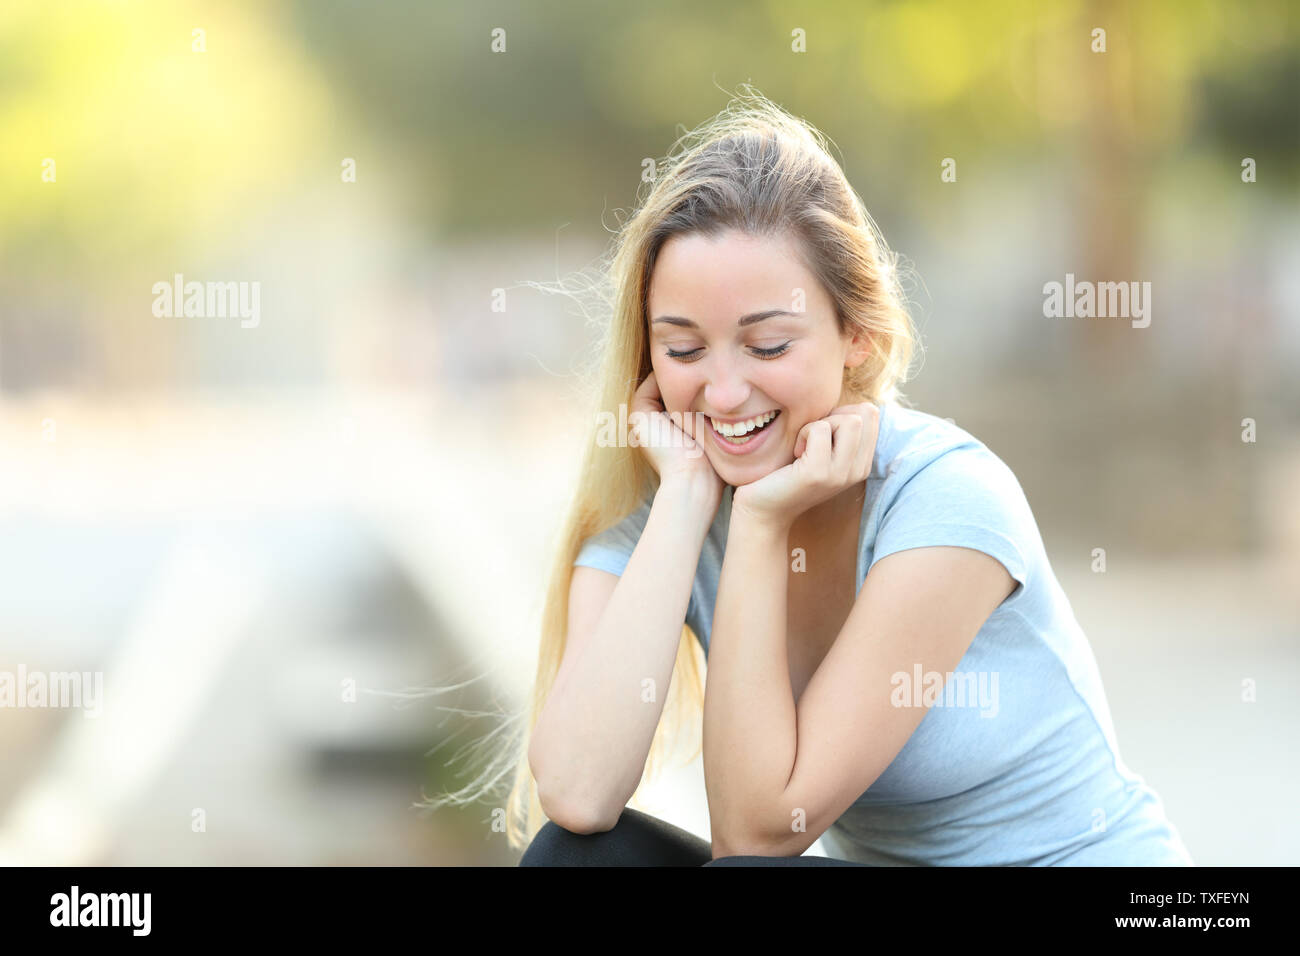 Candid teenage girl laughing looking down sititng in a park Stock Photo